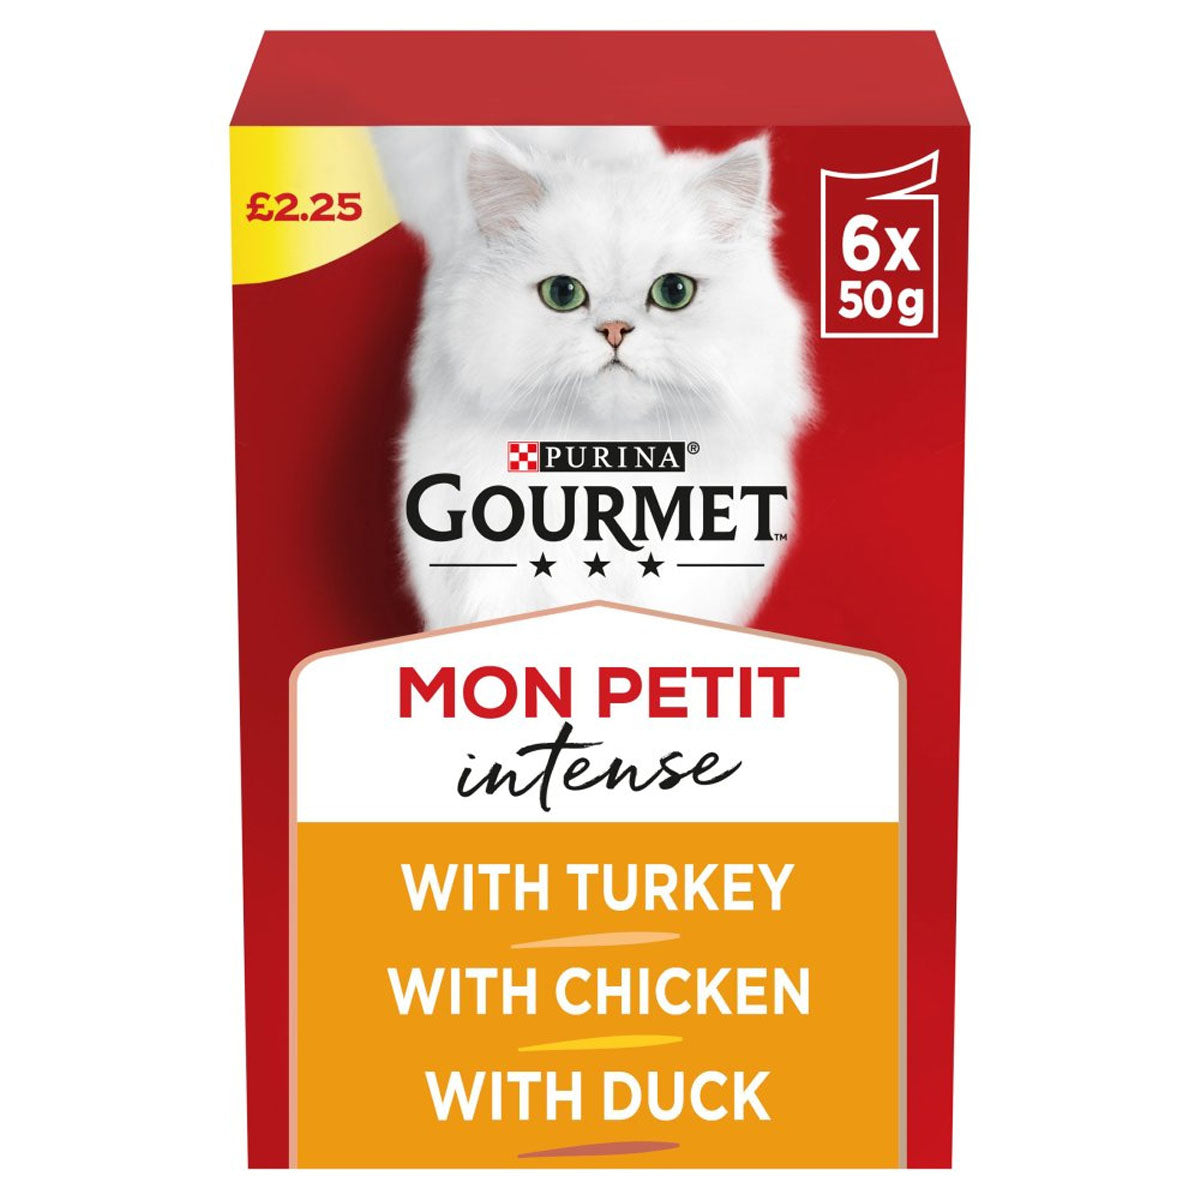 A box of Purina - Gourmet Mon Petit Intense in a Delicious Sauce - 6 x 50g (300g) with turkey and duck.